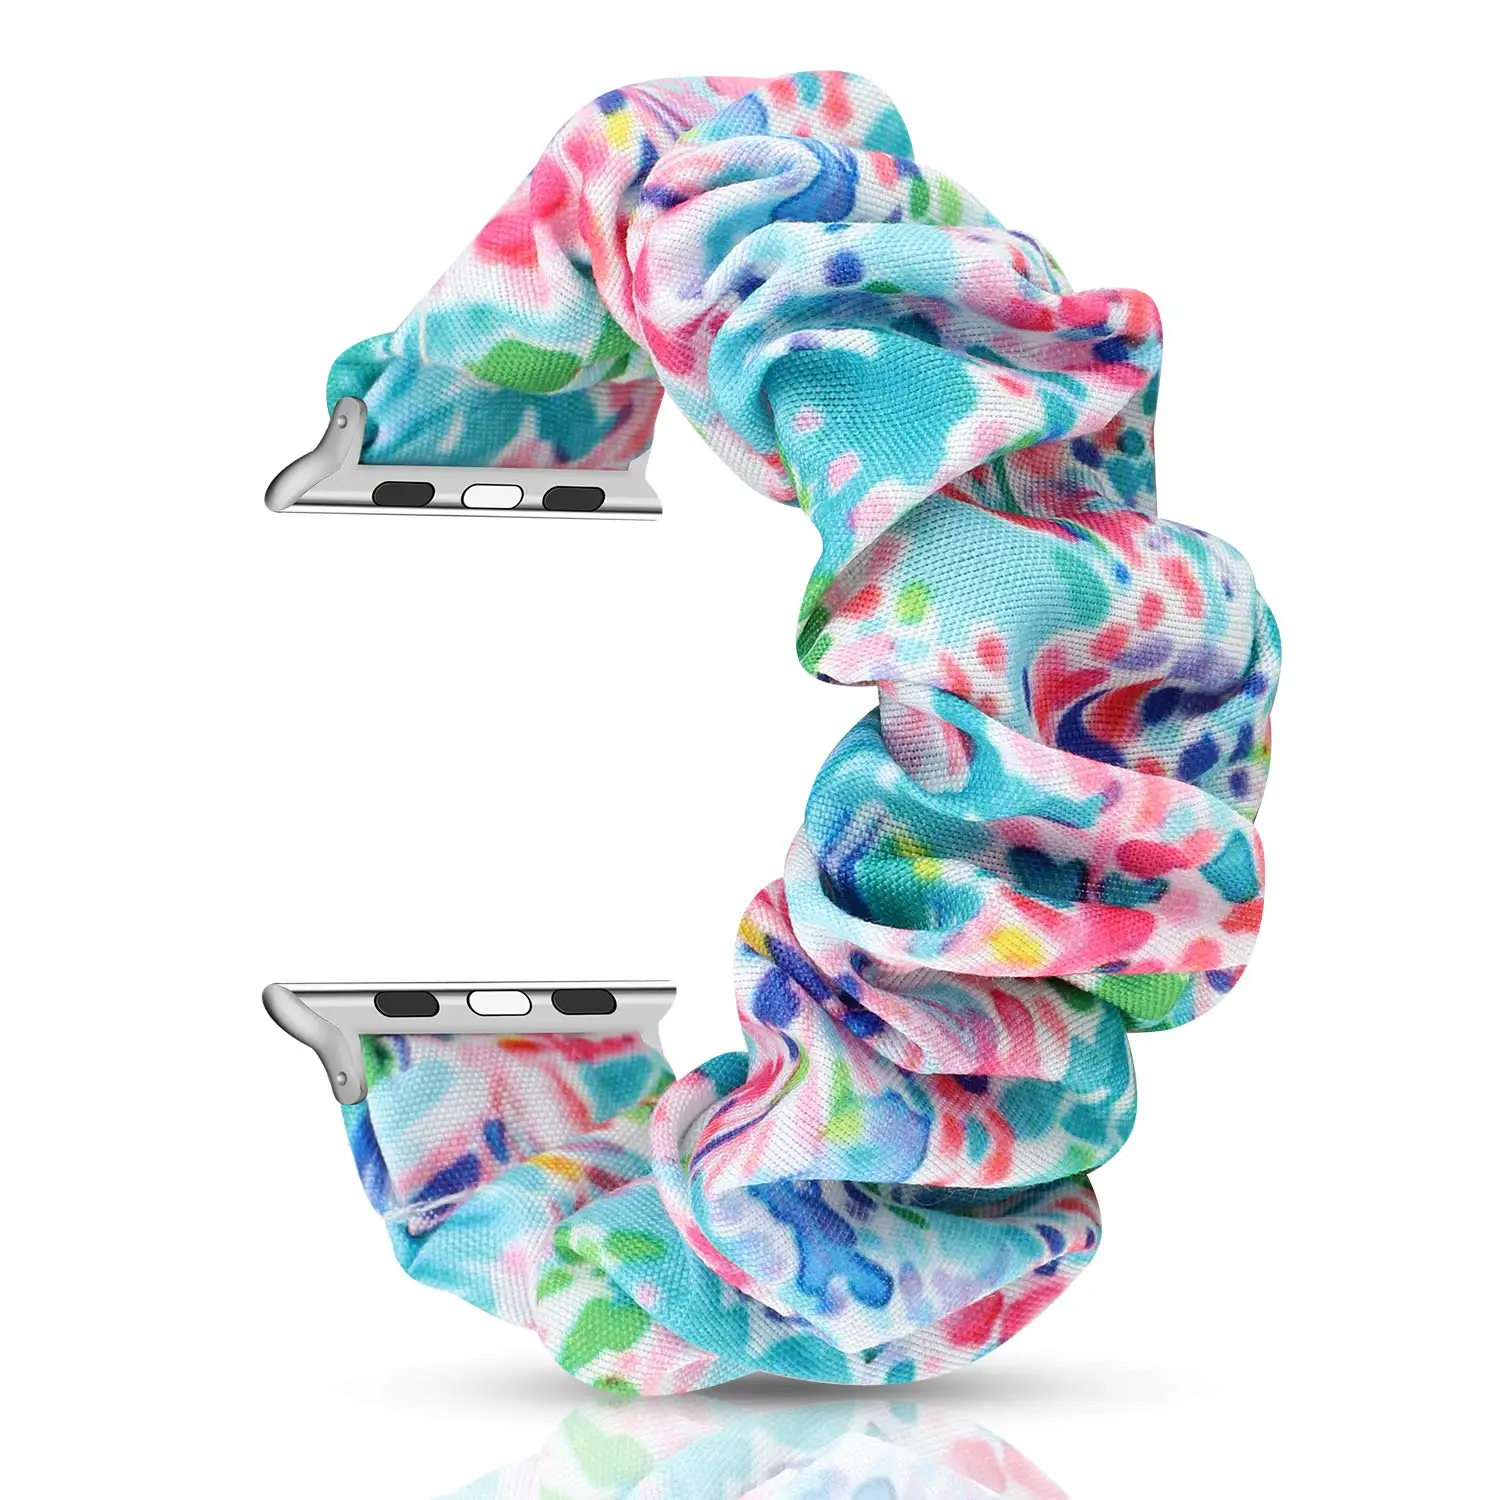 

Amazon Hot Scrunchie Elastic Band For Apple Watch 6 5 4 3 38 40mm Bands Sport Strap Women Bracelet For Iwatch Wrist Series 5 4, As show